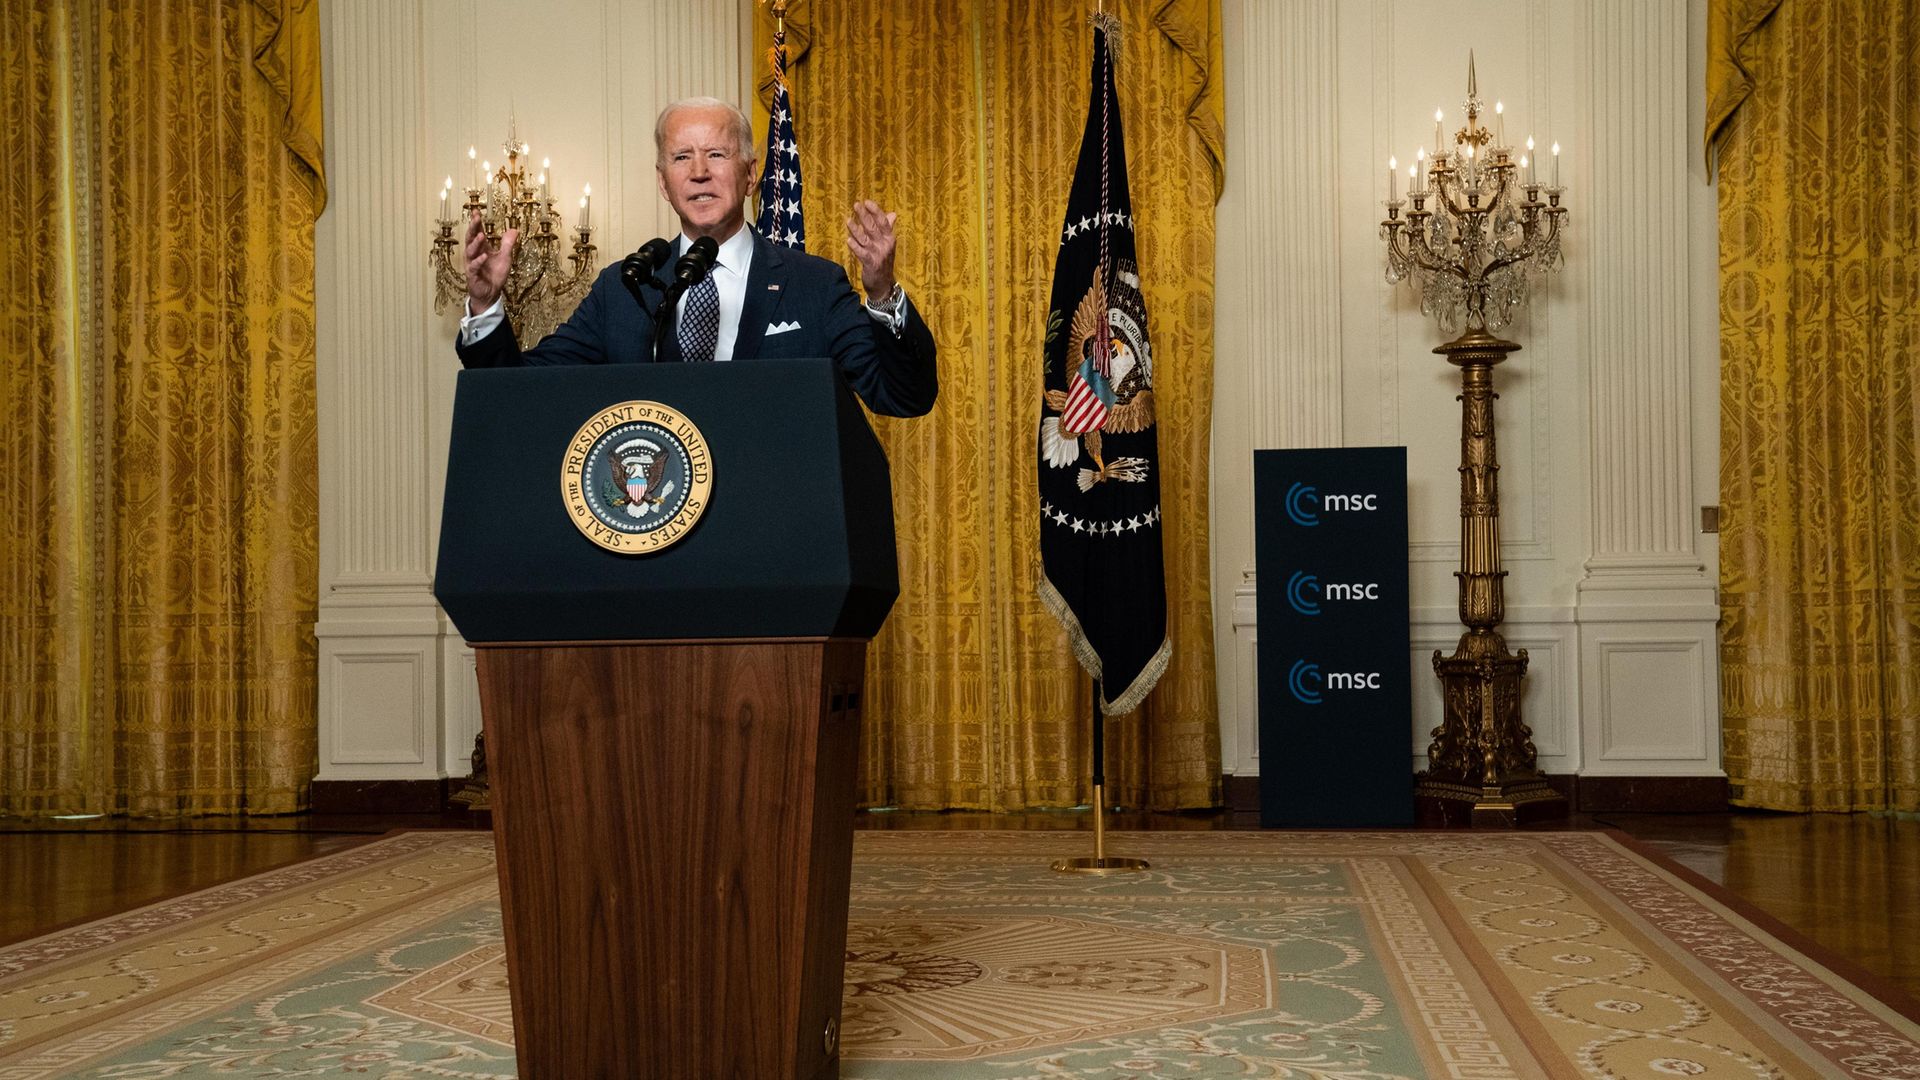 SPEAKING UP: Joe Biden speaks to the Munich Security Conference from the White House - Credit: Getty Images